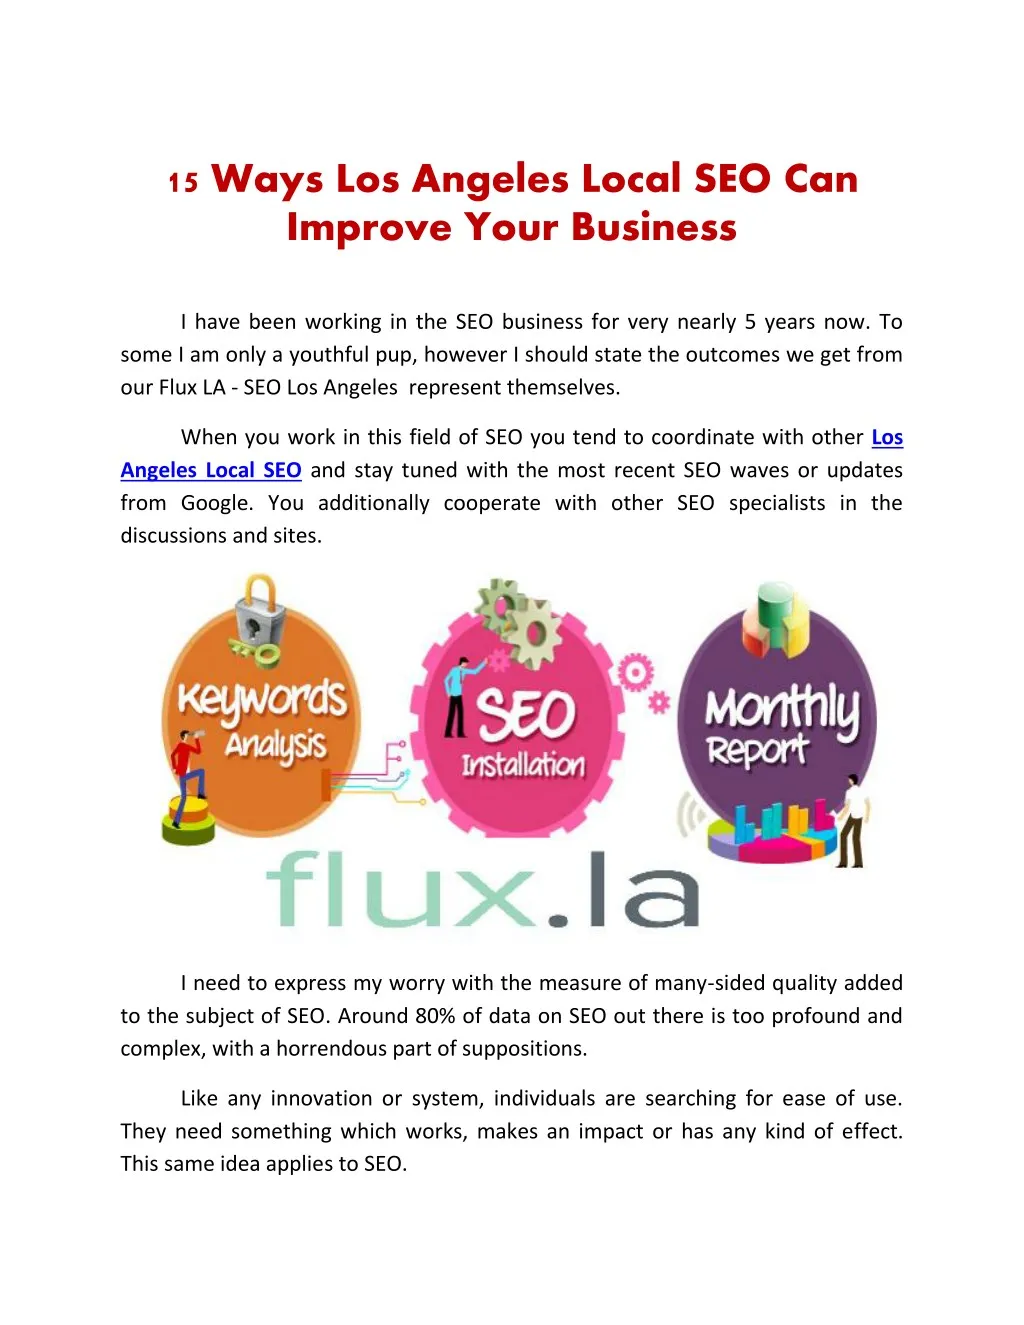 15 ways los angeles local seo can improve your